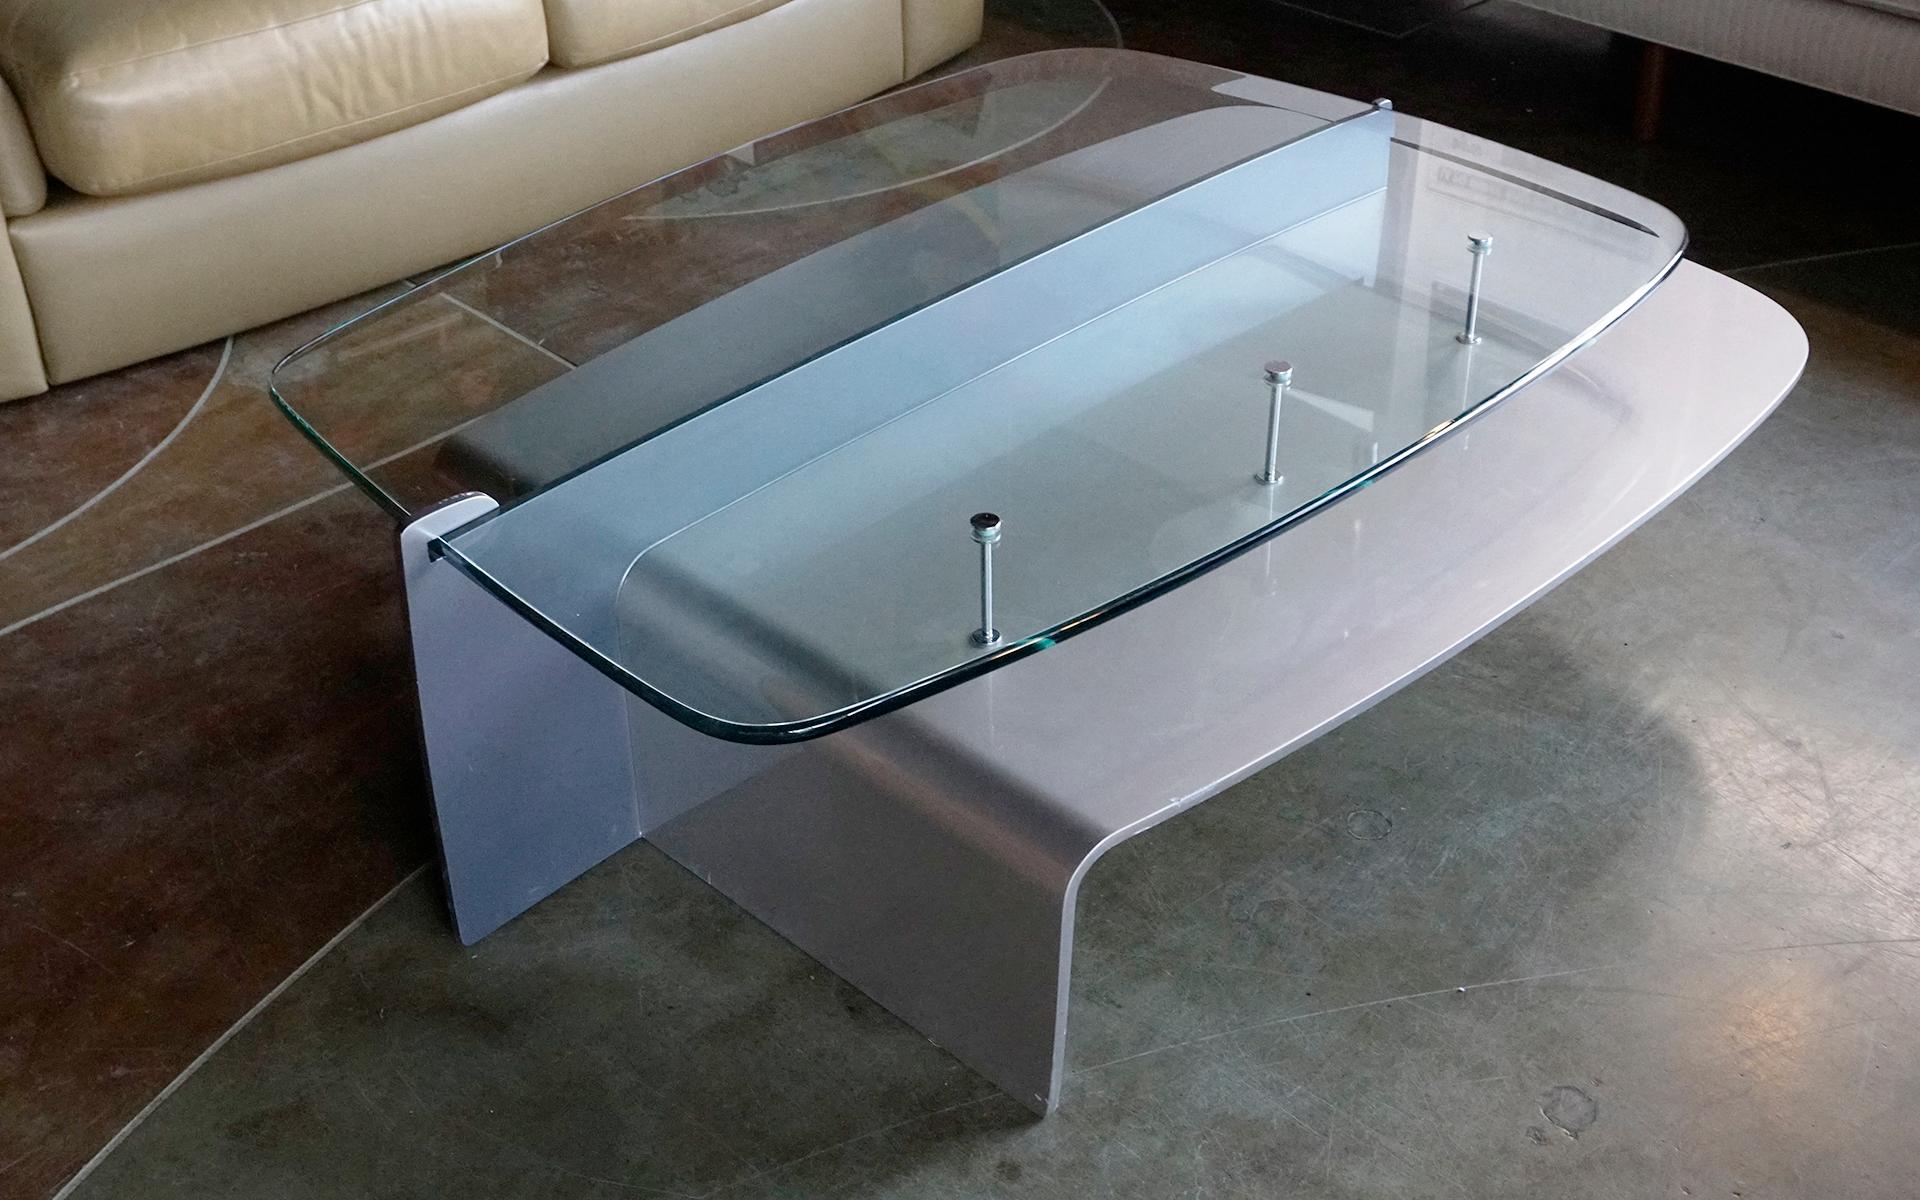 Outstanding one of a kind multi level coffee table designed by Ron Krueck and Mark Sexton for the Stone Residence, Chicago, USA, 1986. Enameled steel, glass, and chrome-plated brass. The thick glass top has a rounded edge and a bevel on the